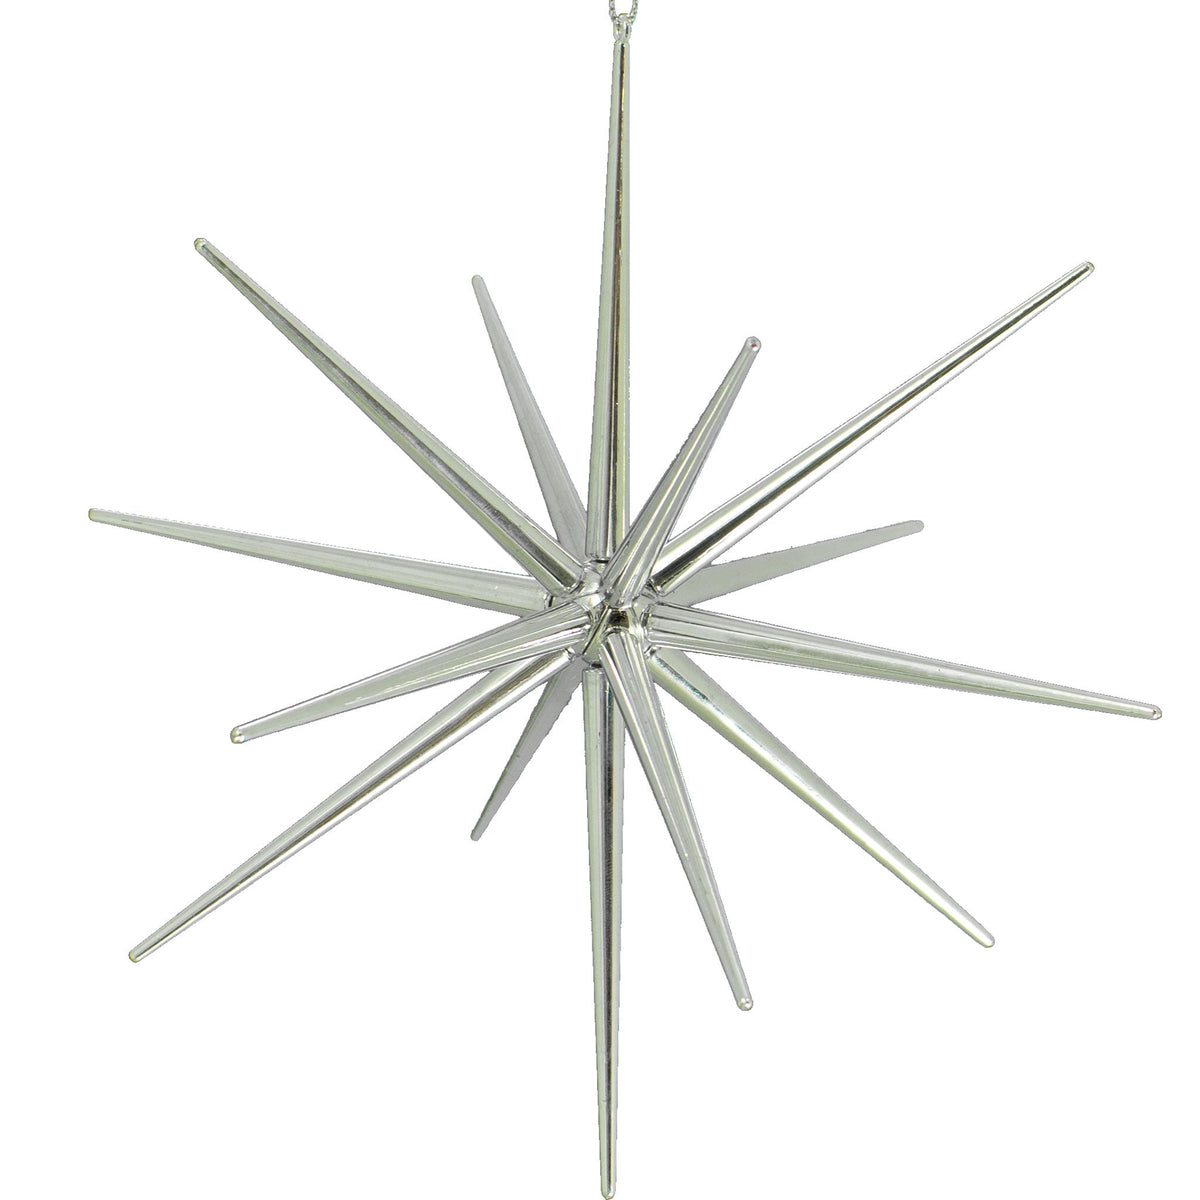 Silver Starburst Christmas Ornaments and Holiday Decorations!